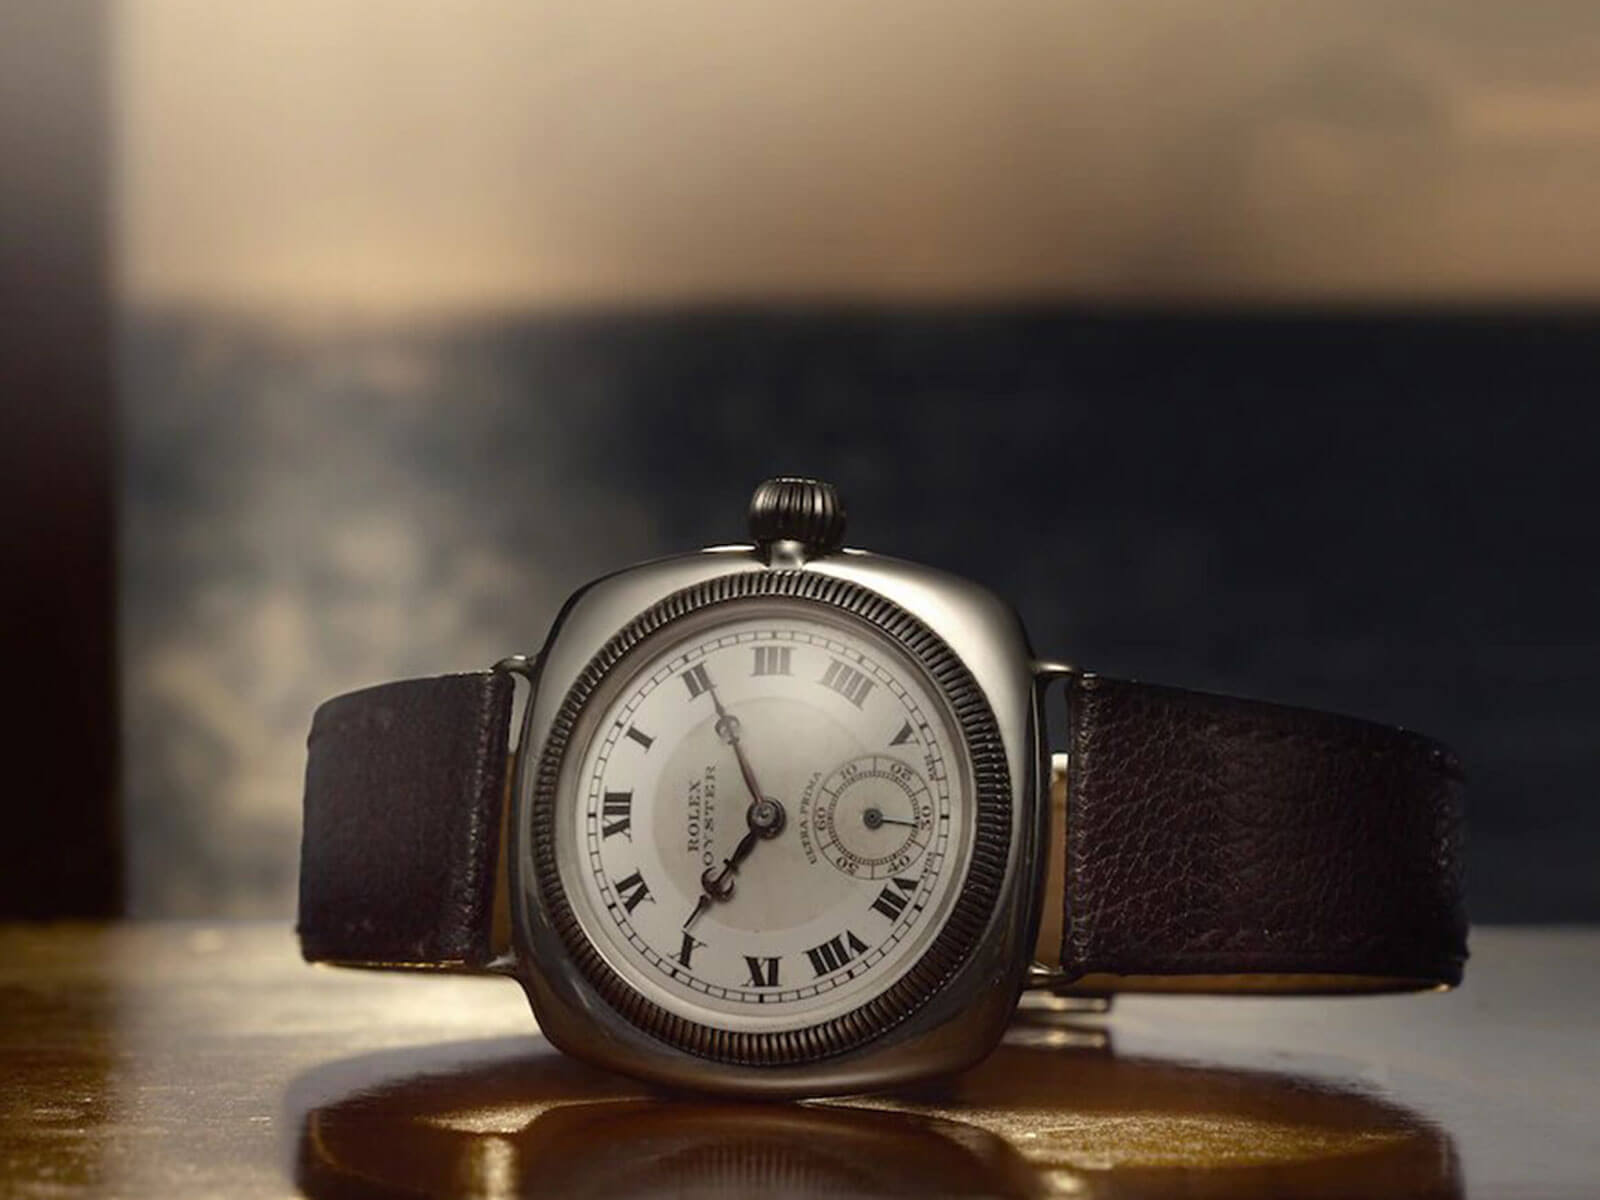 How much do you know about the first Rolex Waterproof Watch?